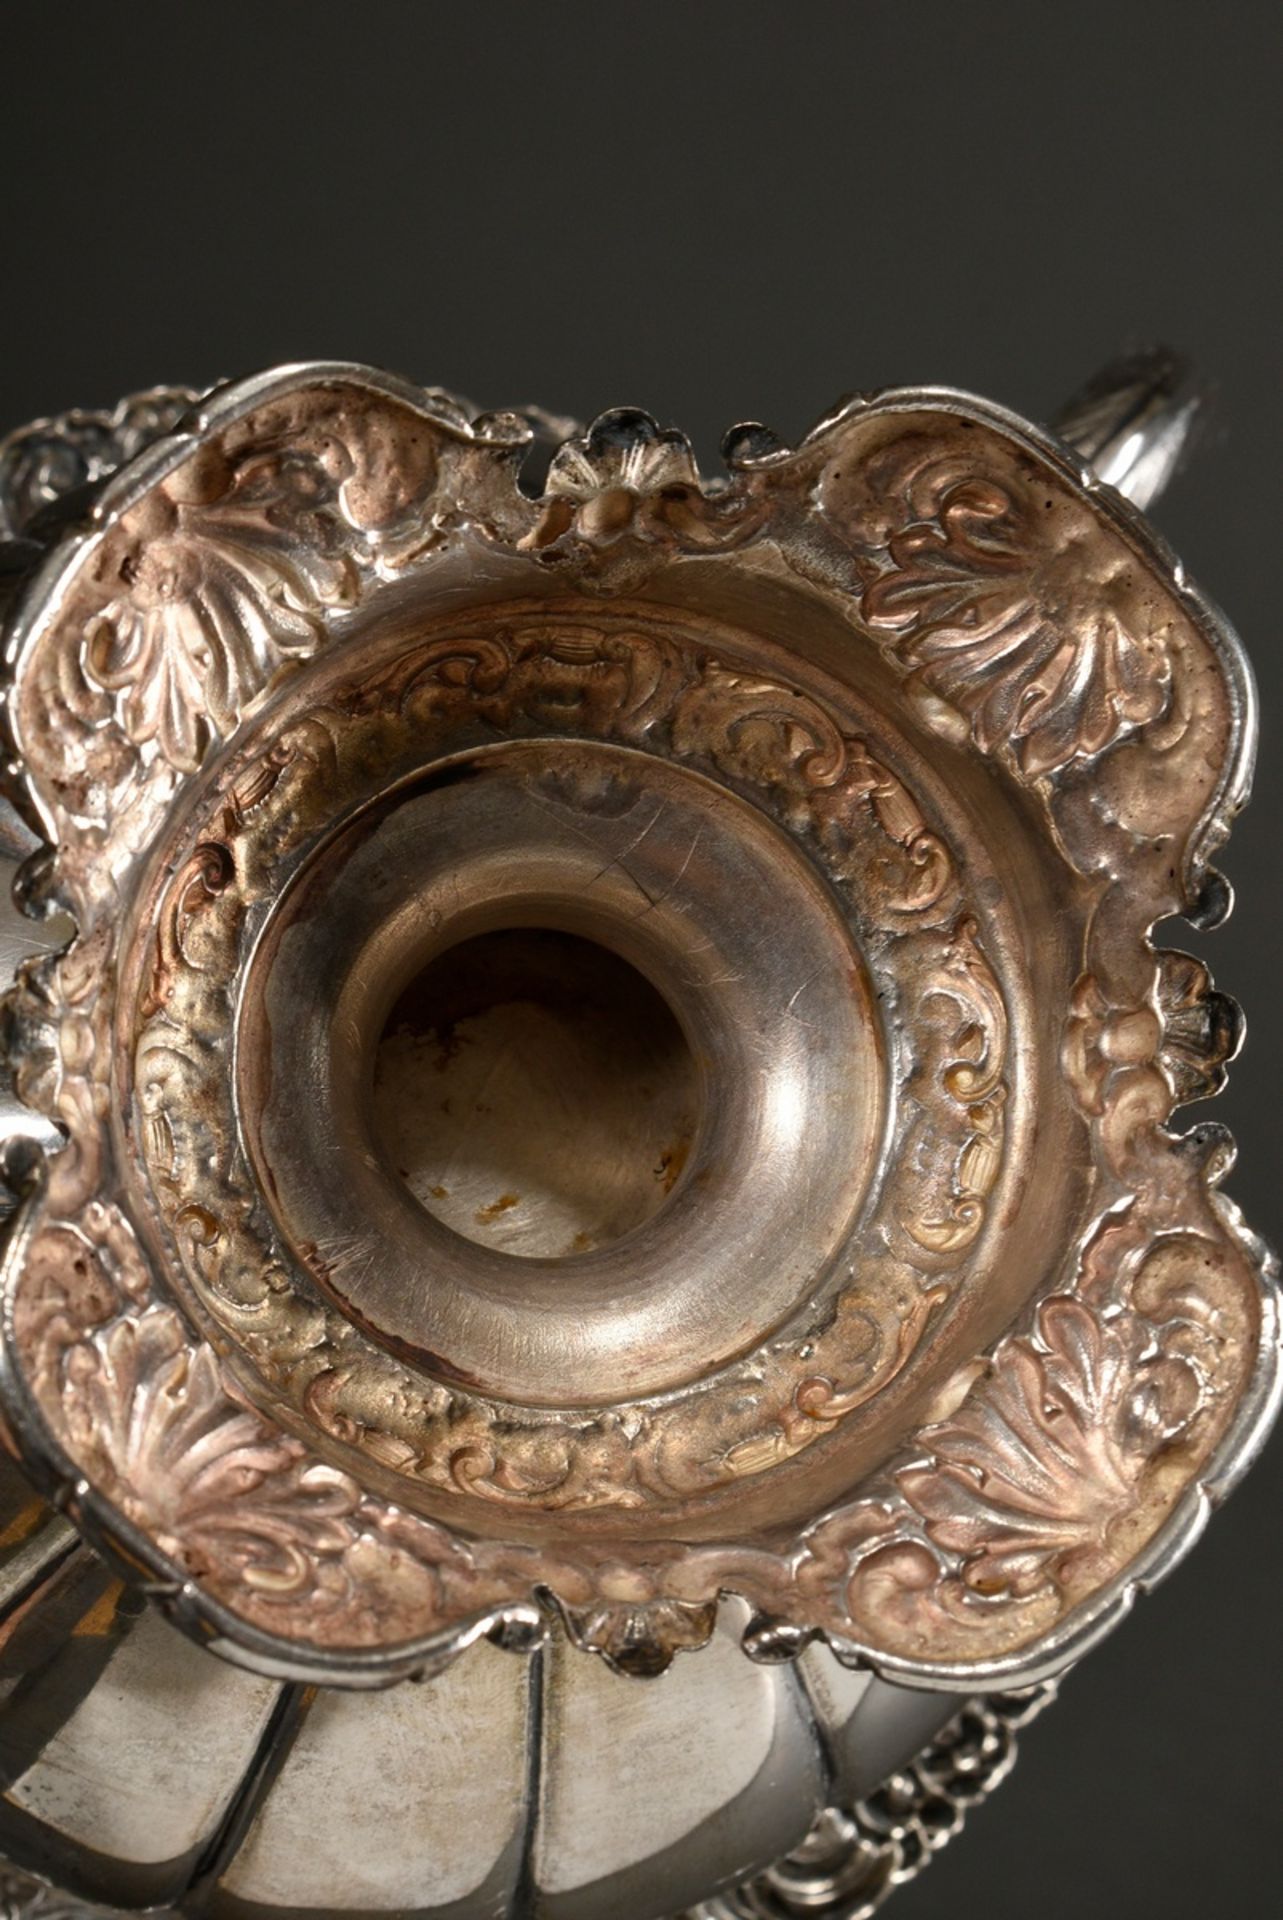 Biedermeier sugar centerpiece in crater shape with floral relief on foot, rim and handles, silver 1 - Image 3 of 4